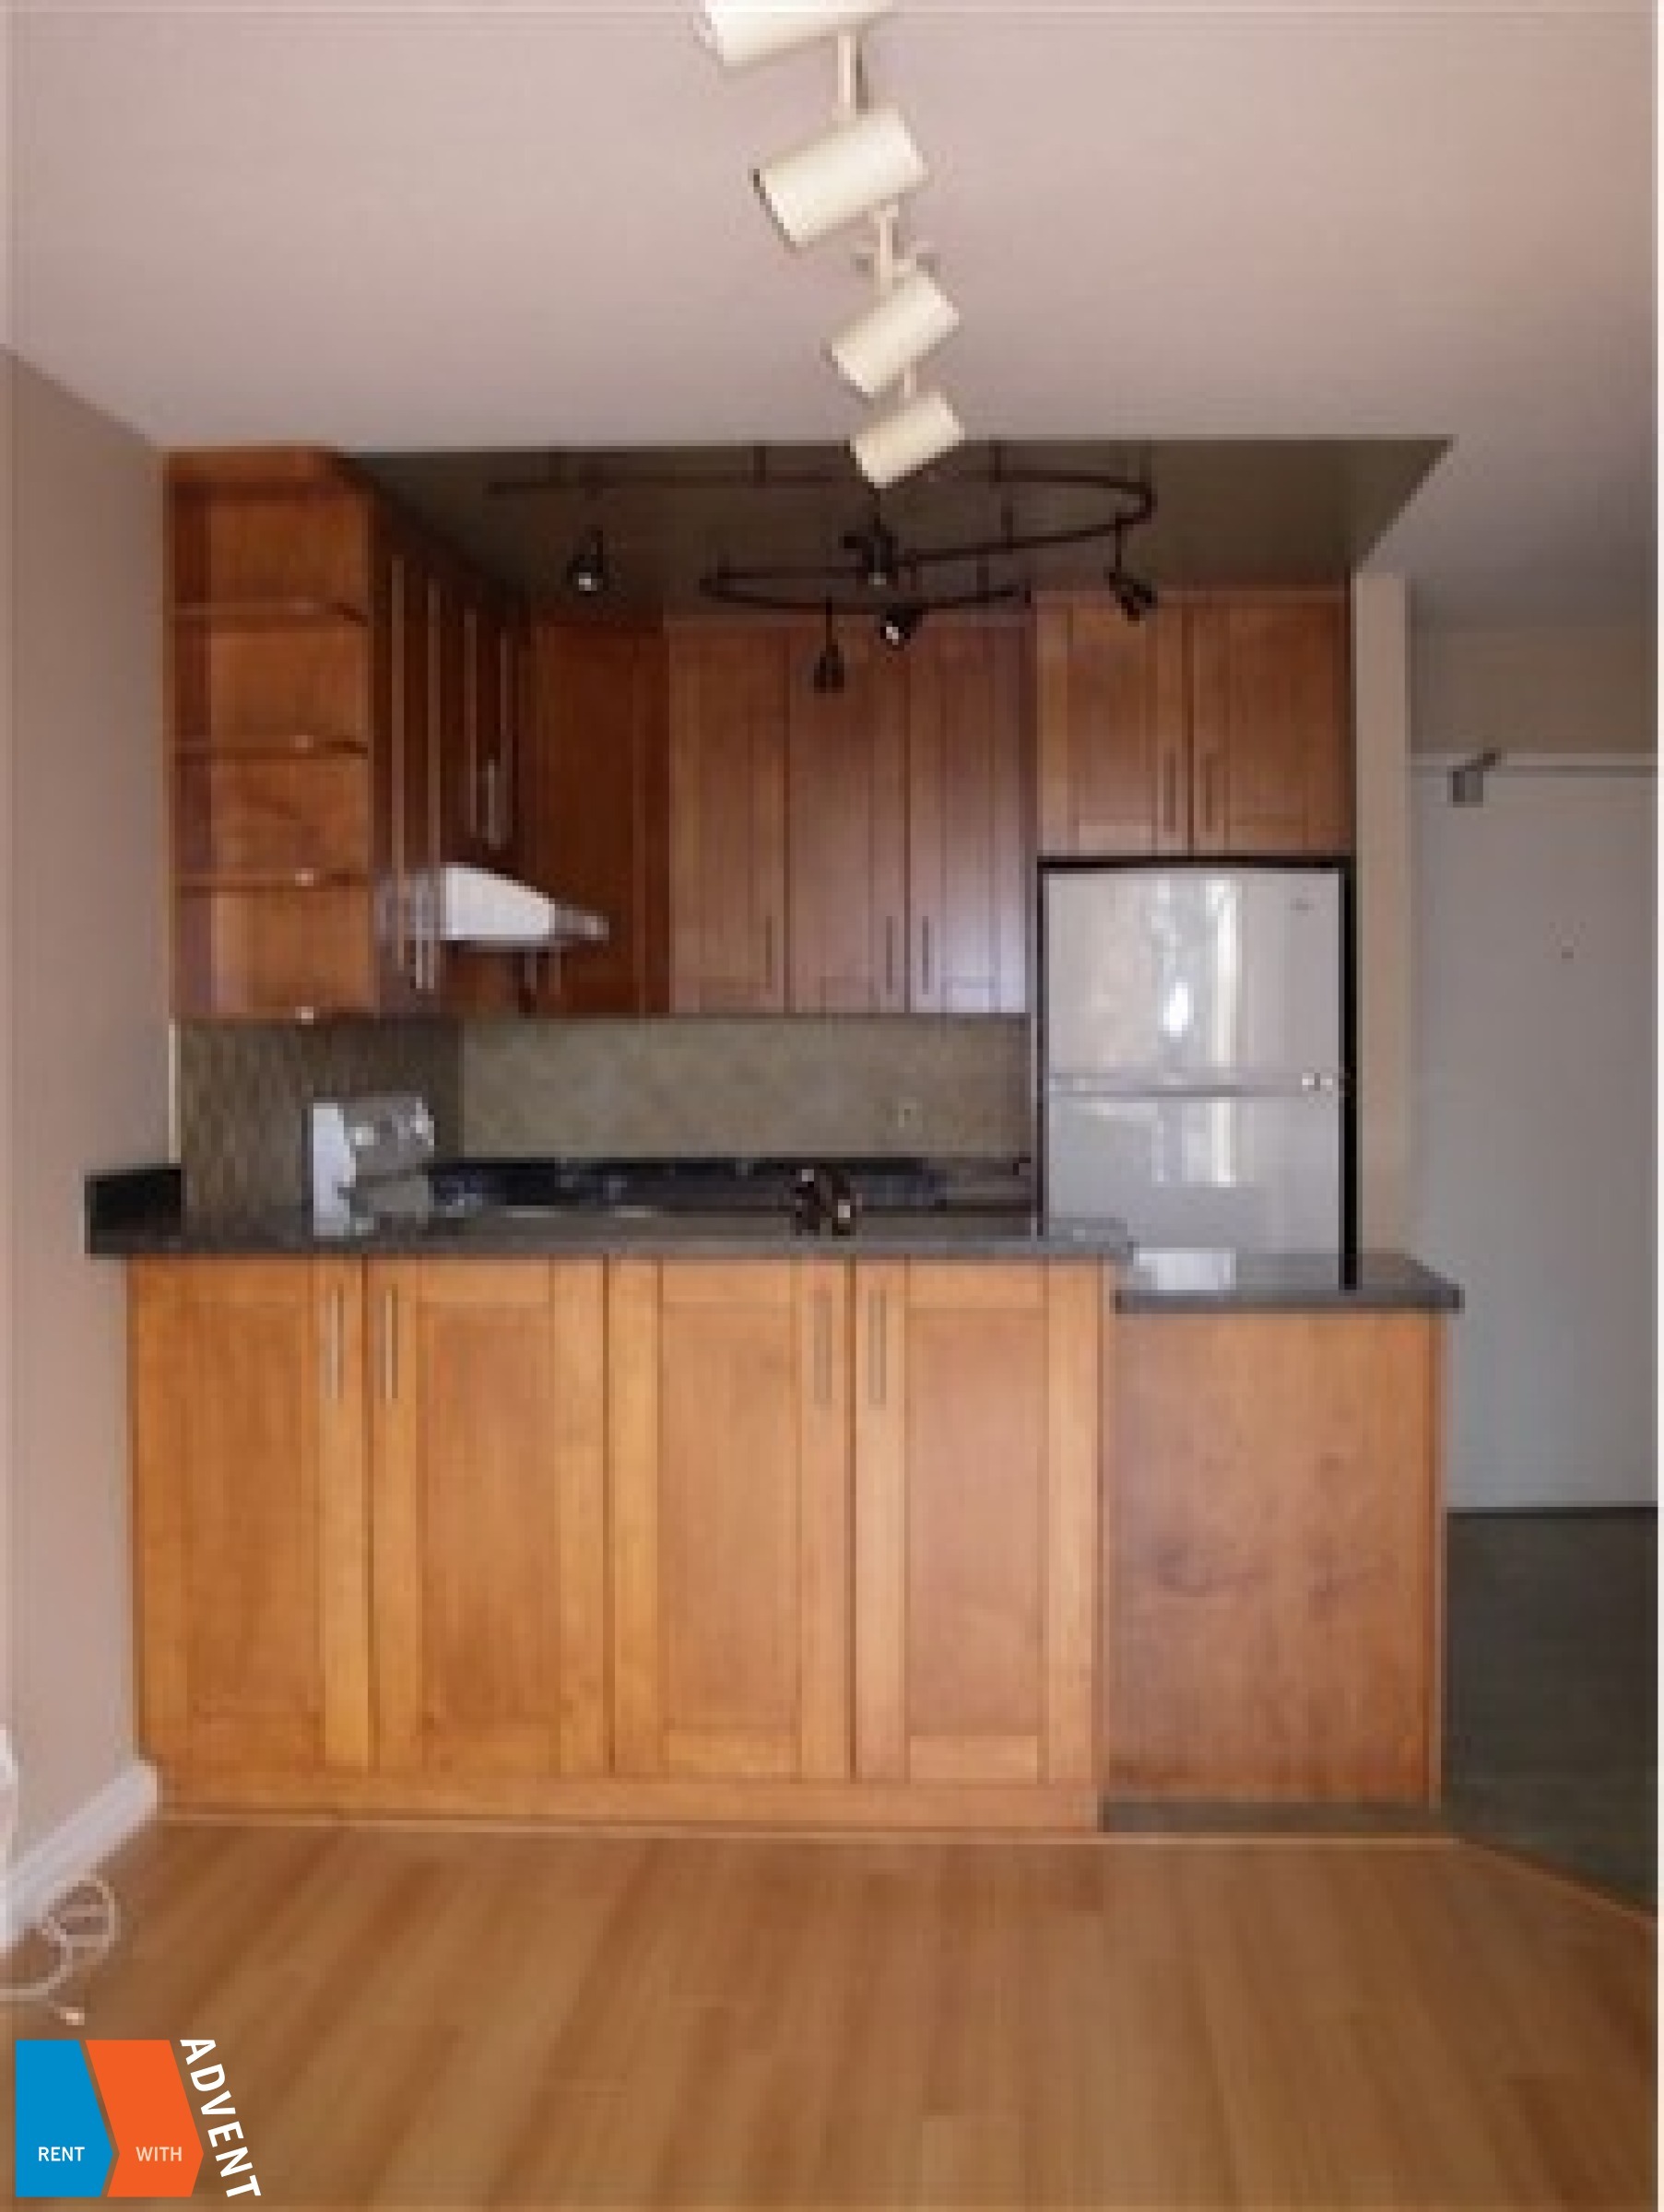 Unfurnished Apartment Rental at Anchor Point in Downtown Vancouver. 915 - 950 Drake Street, Vancouver, BC, Canada.